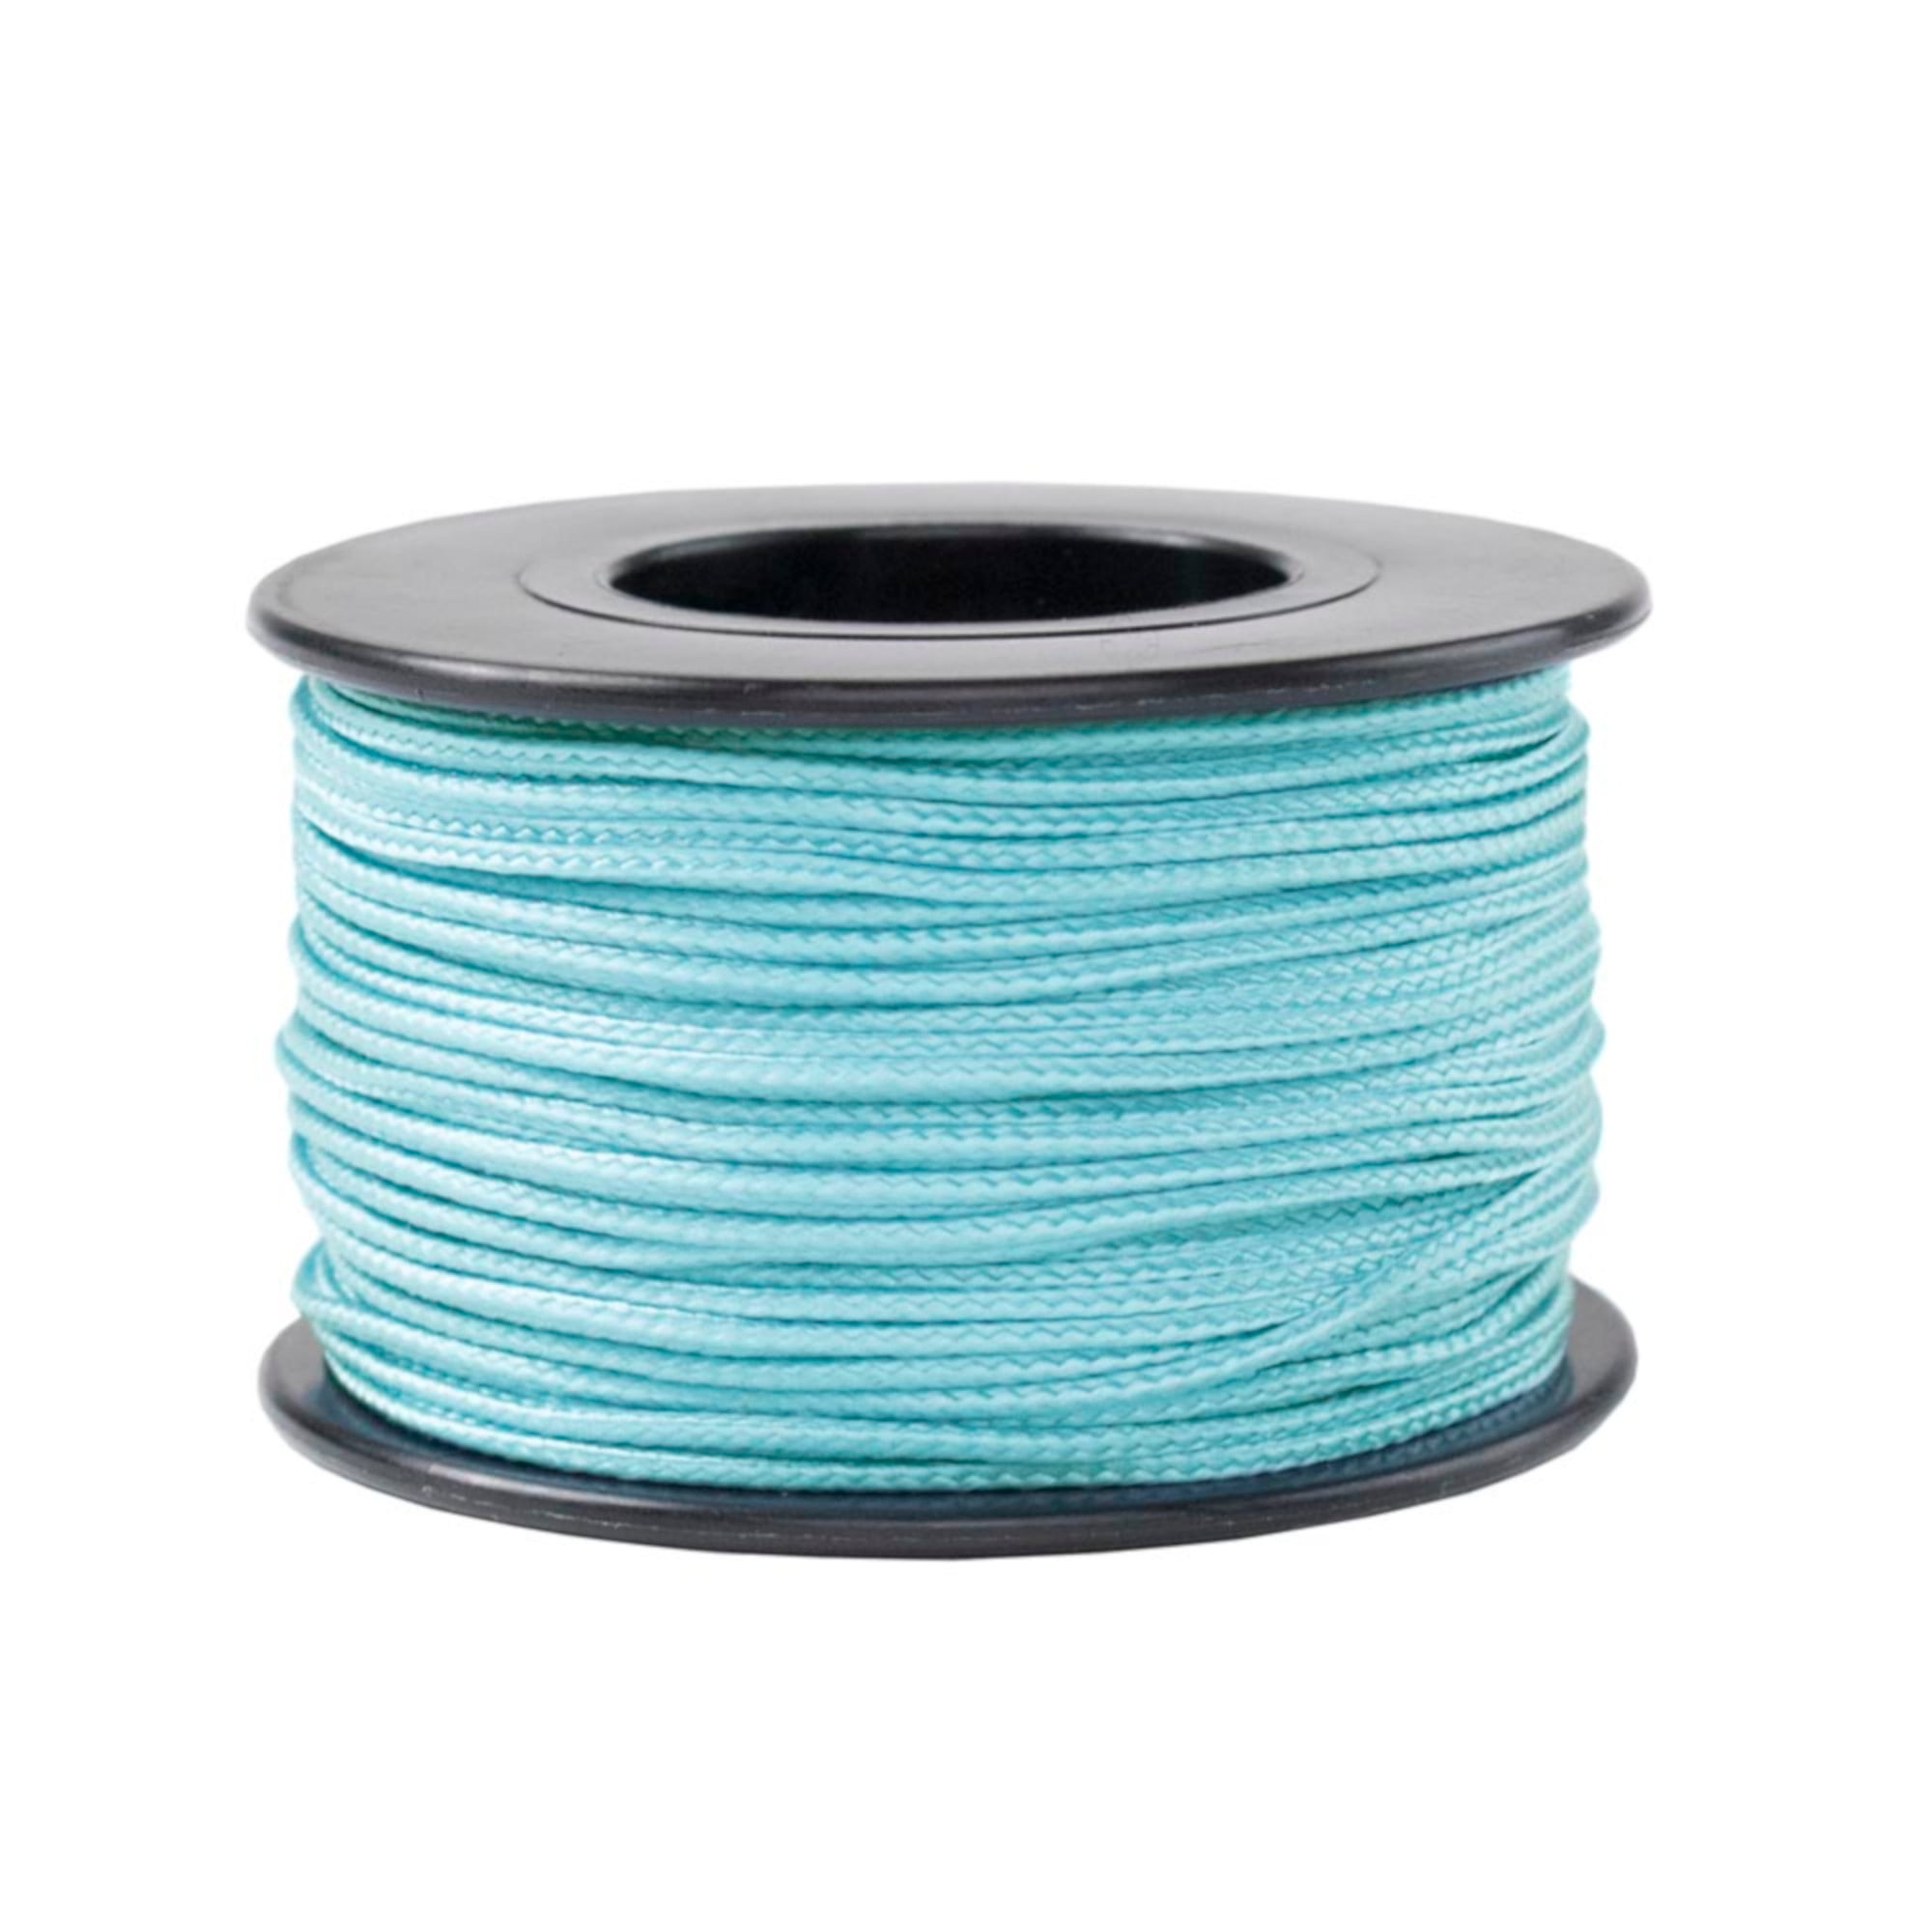 Paracord Planet Micro Cord: 1.18mm Diameter 125 Feet Spool of Braided Cord  - Available in a Variety of Colors Made in the USA 